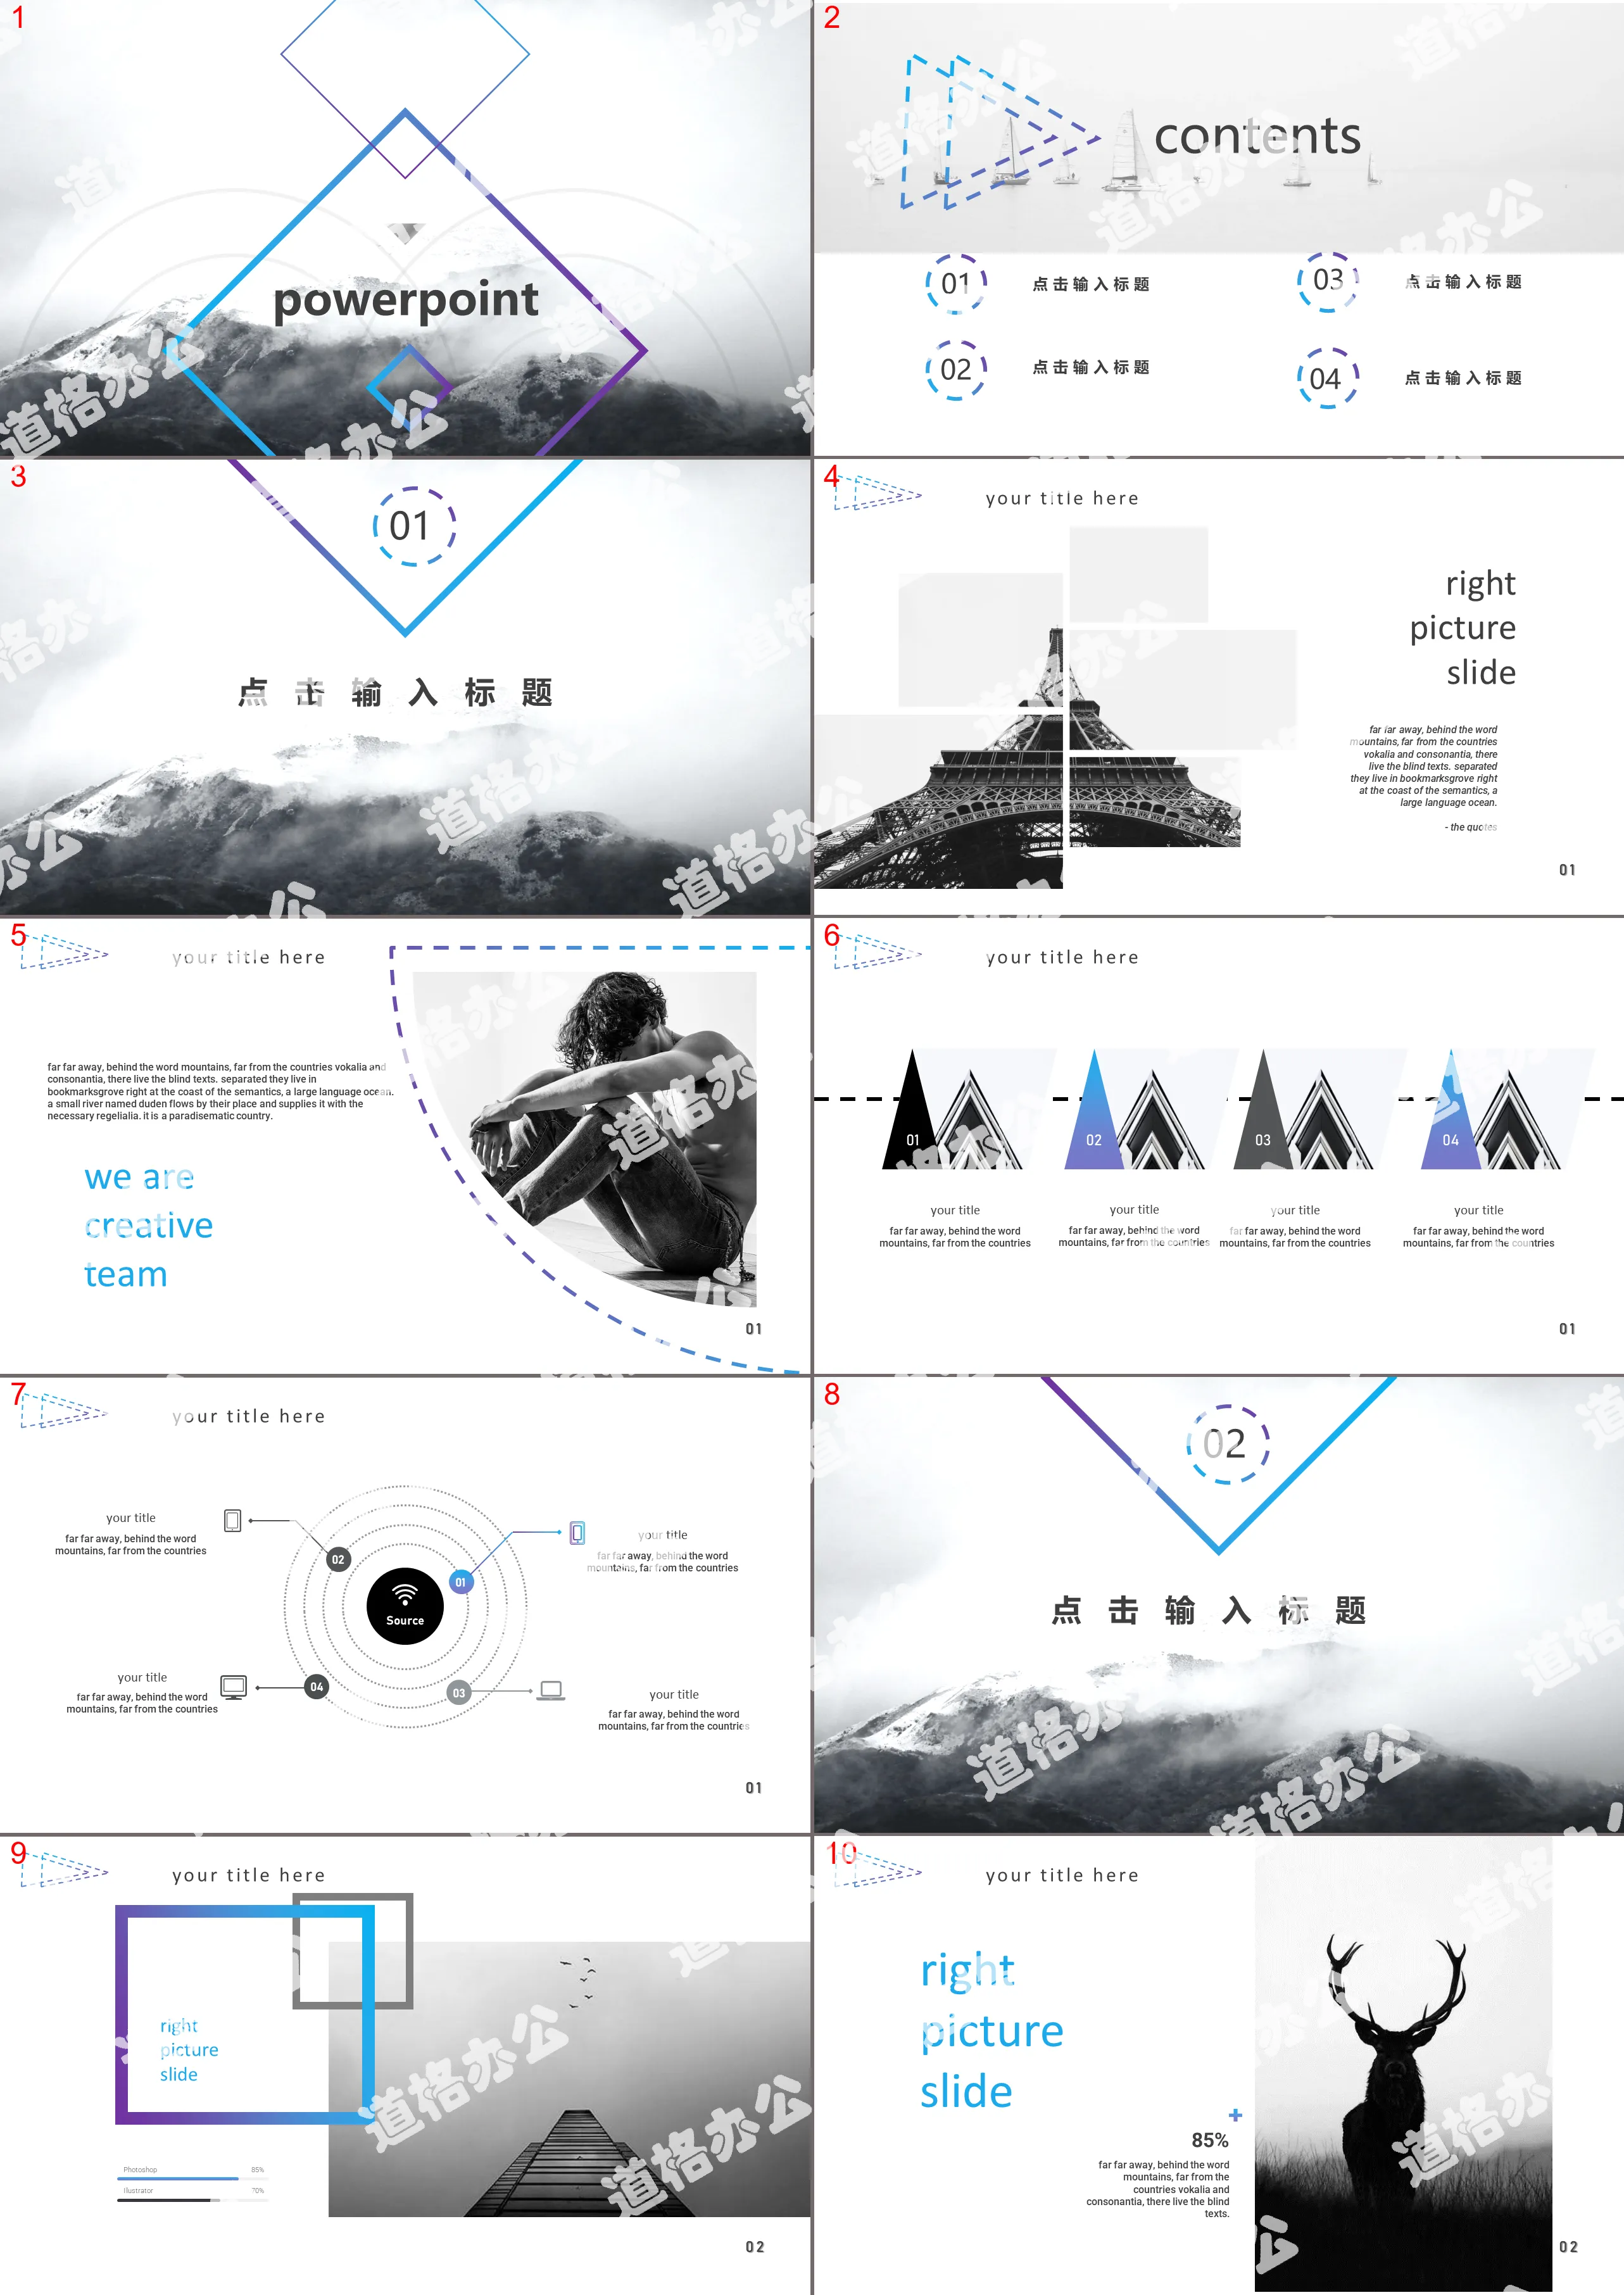 Black and white snow mountain landscape background European and American pictures layout design PPT template